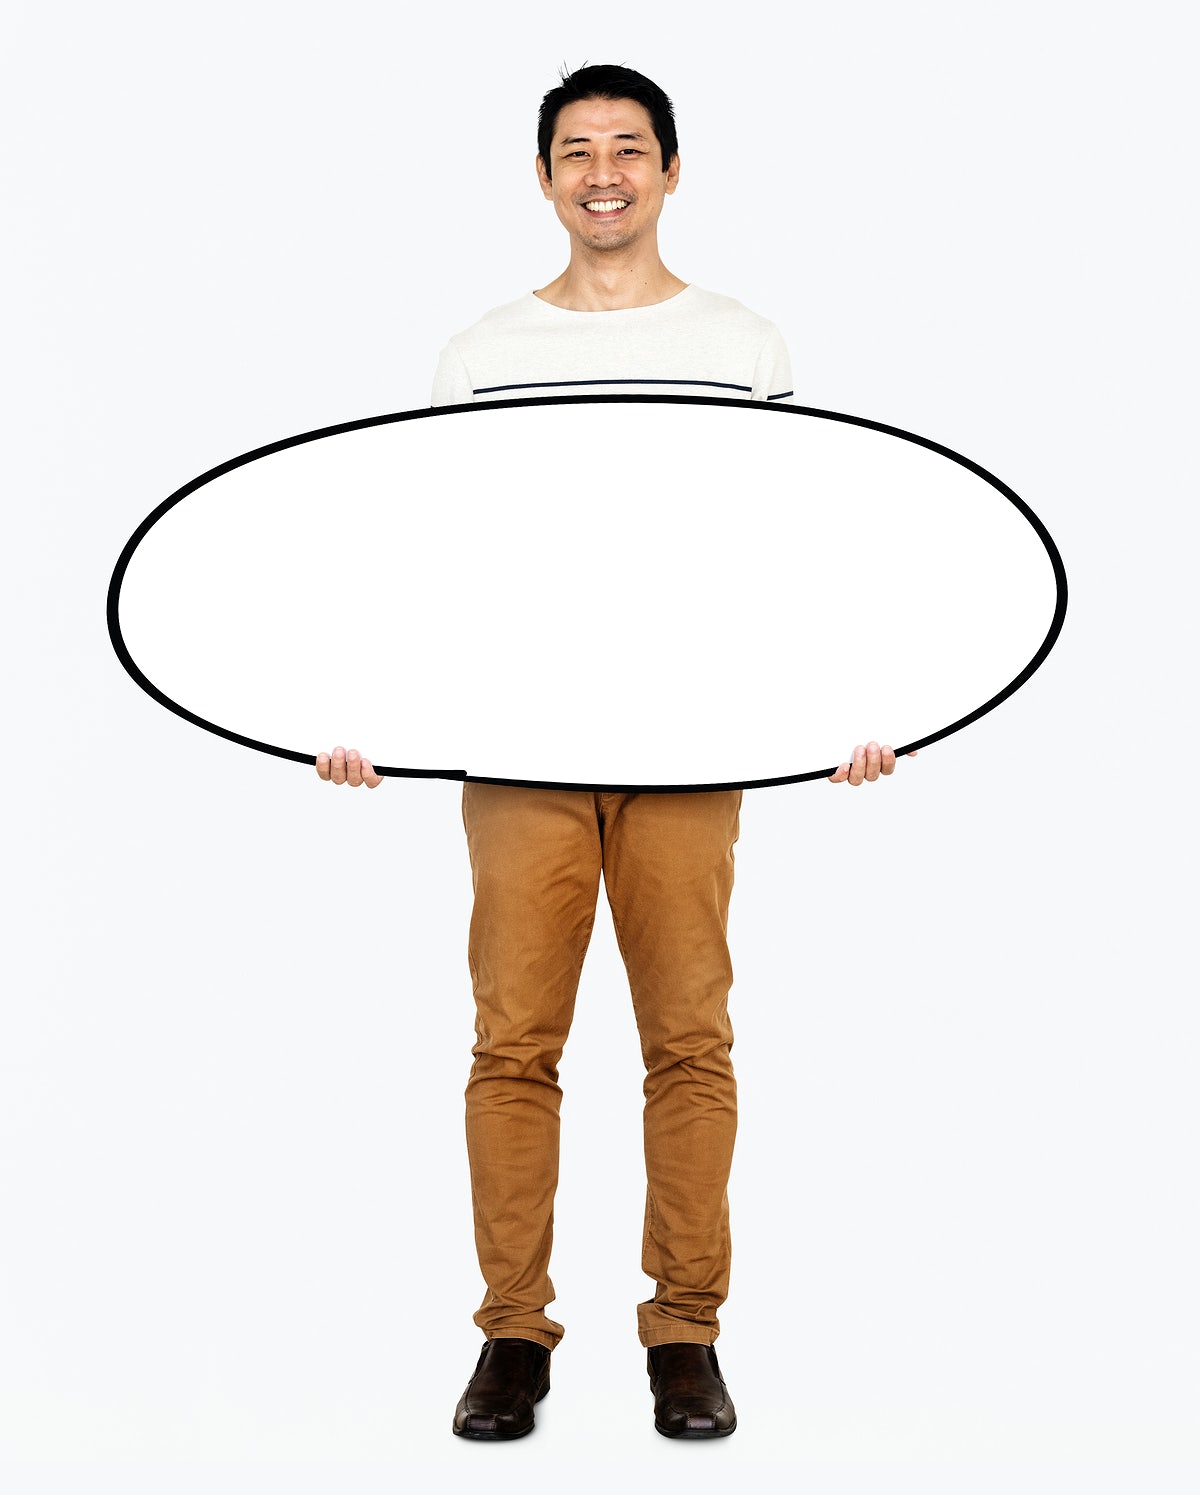 Free Cheerful Man Holding A Blank White Board